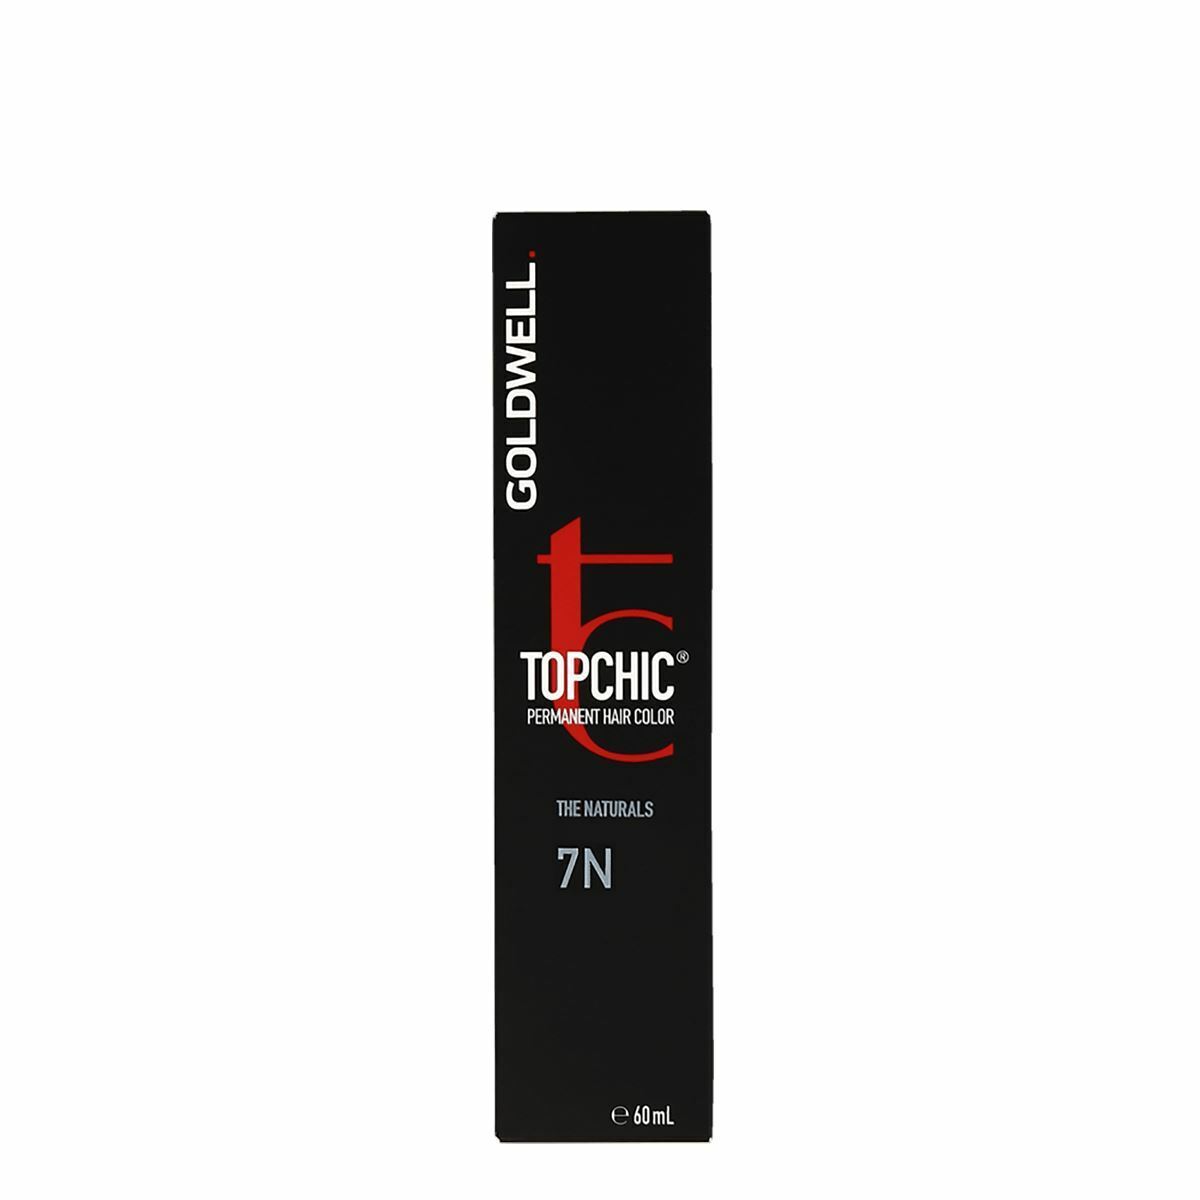 Goldwell Top Chic 7N Mid Blonde The Naturals Permanent Hair Color 60ml